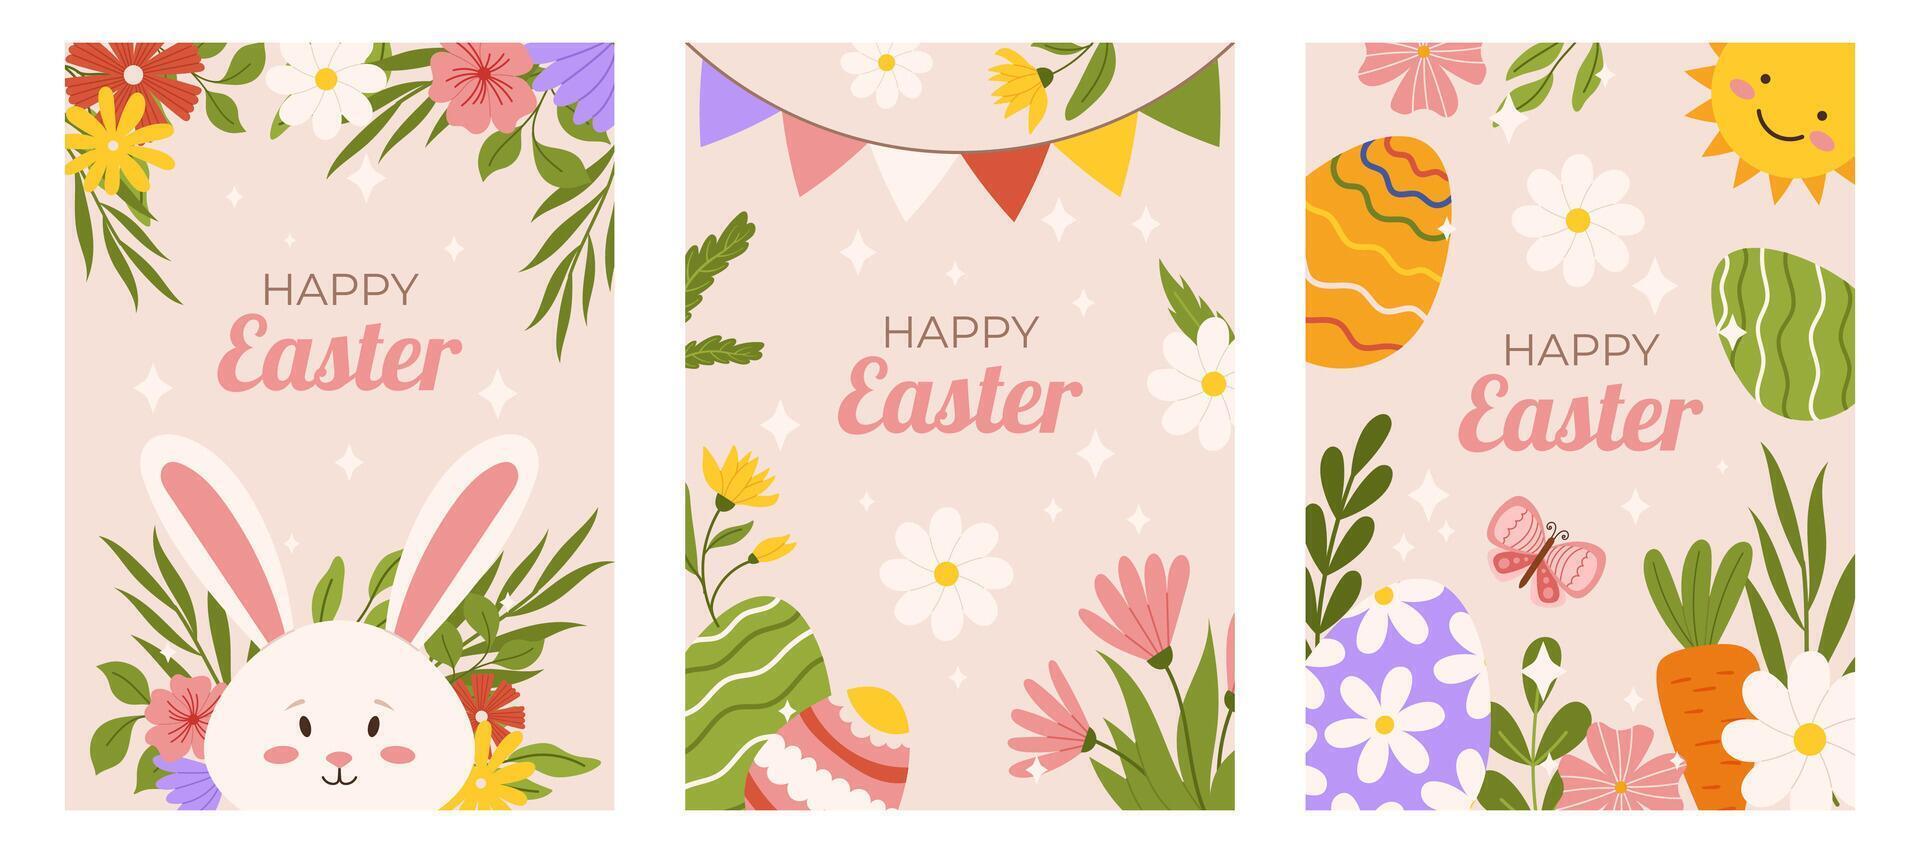 Easter collection of vertical greeting cards template. Design for celebration spring holiday with flowers, bunny, butterfly, sun and painted eggs. Hand drawn flat vector illustration